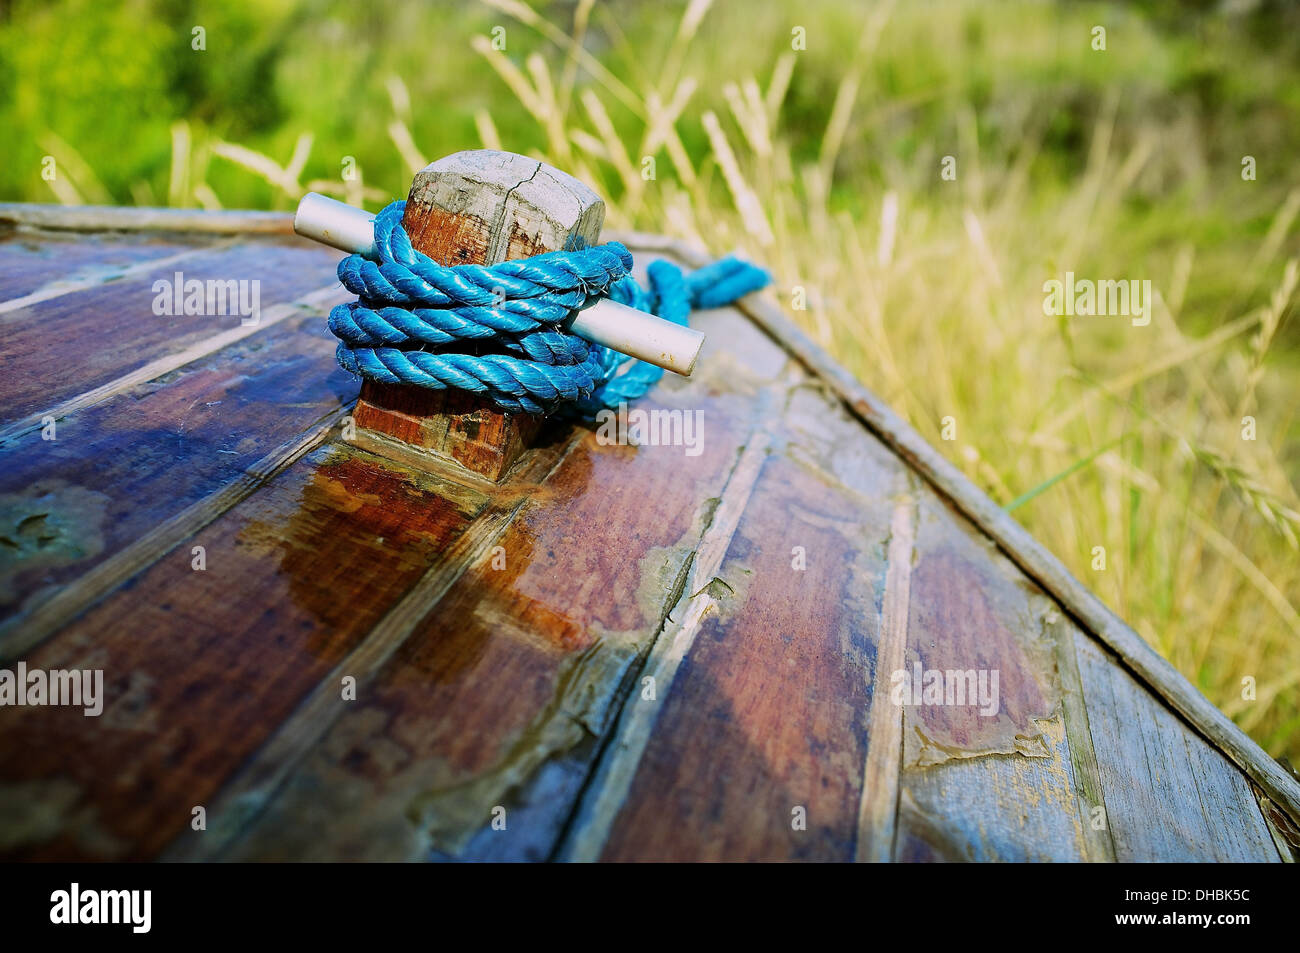 Abstract image of bow (front) of small wooden boat with blue rope coiled around a short post with grass in the background. Stock Photo